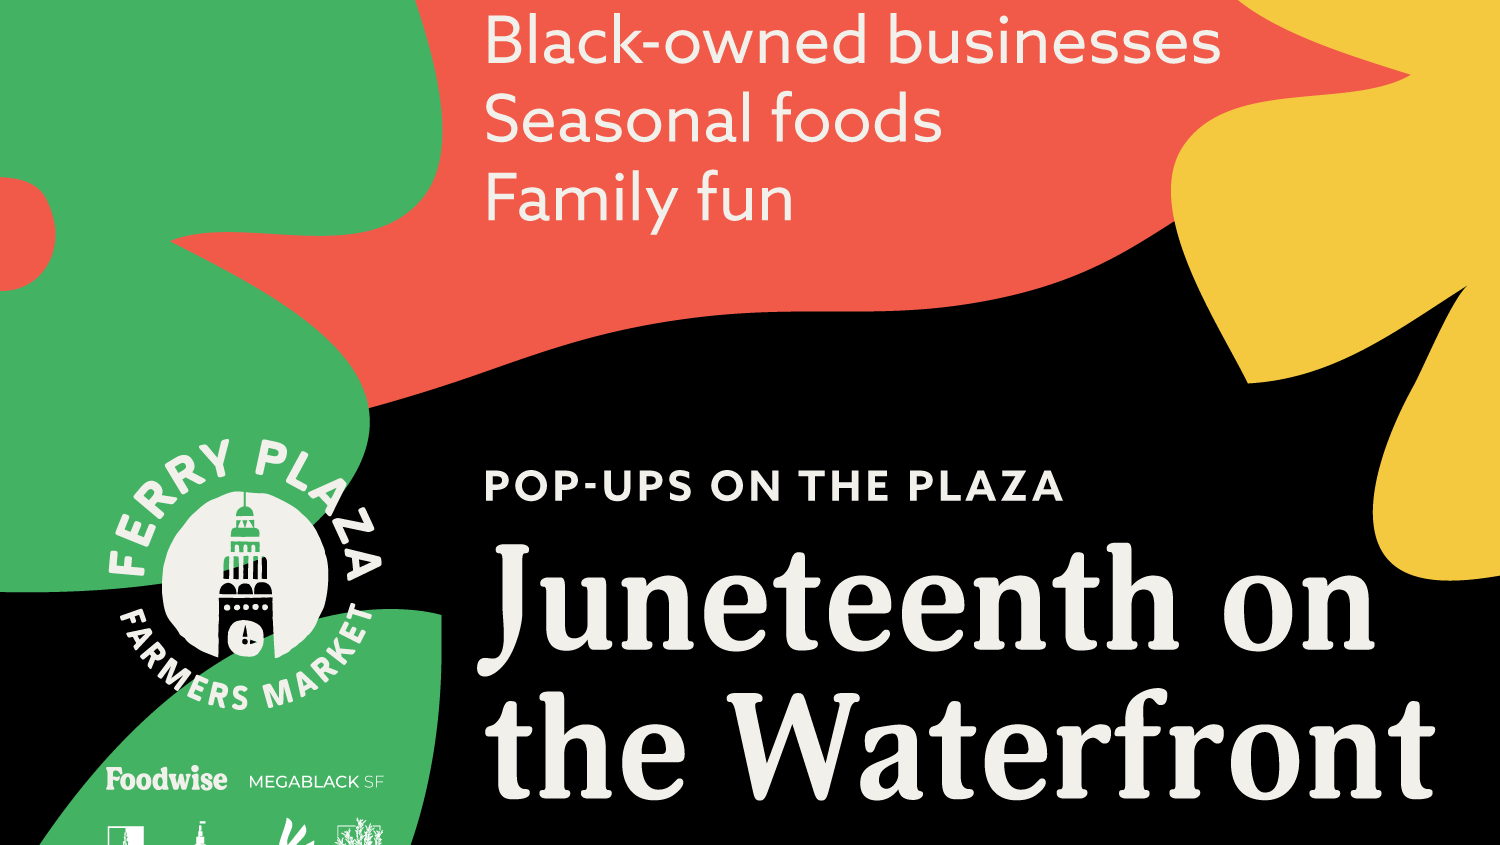 Pop-Ups on the Plaza: Juneteenth on the Waterfront